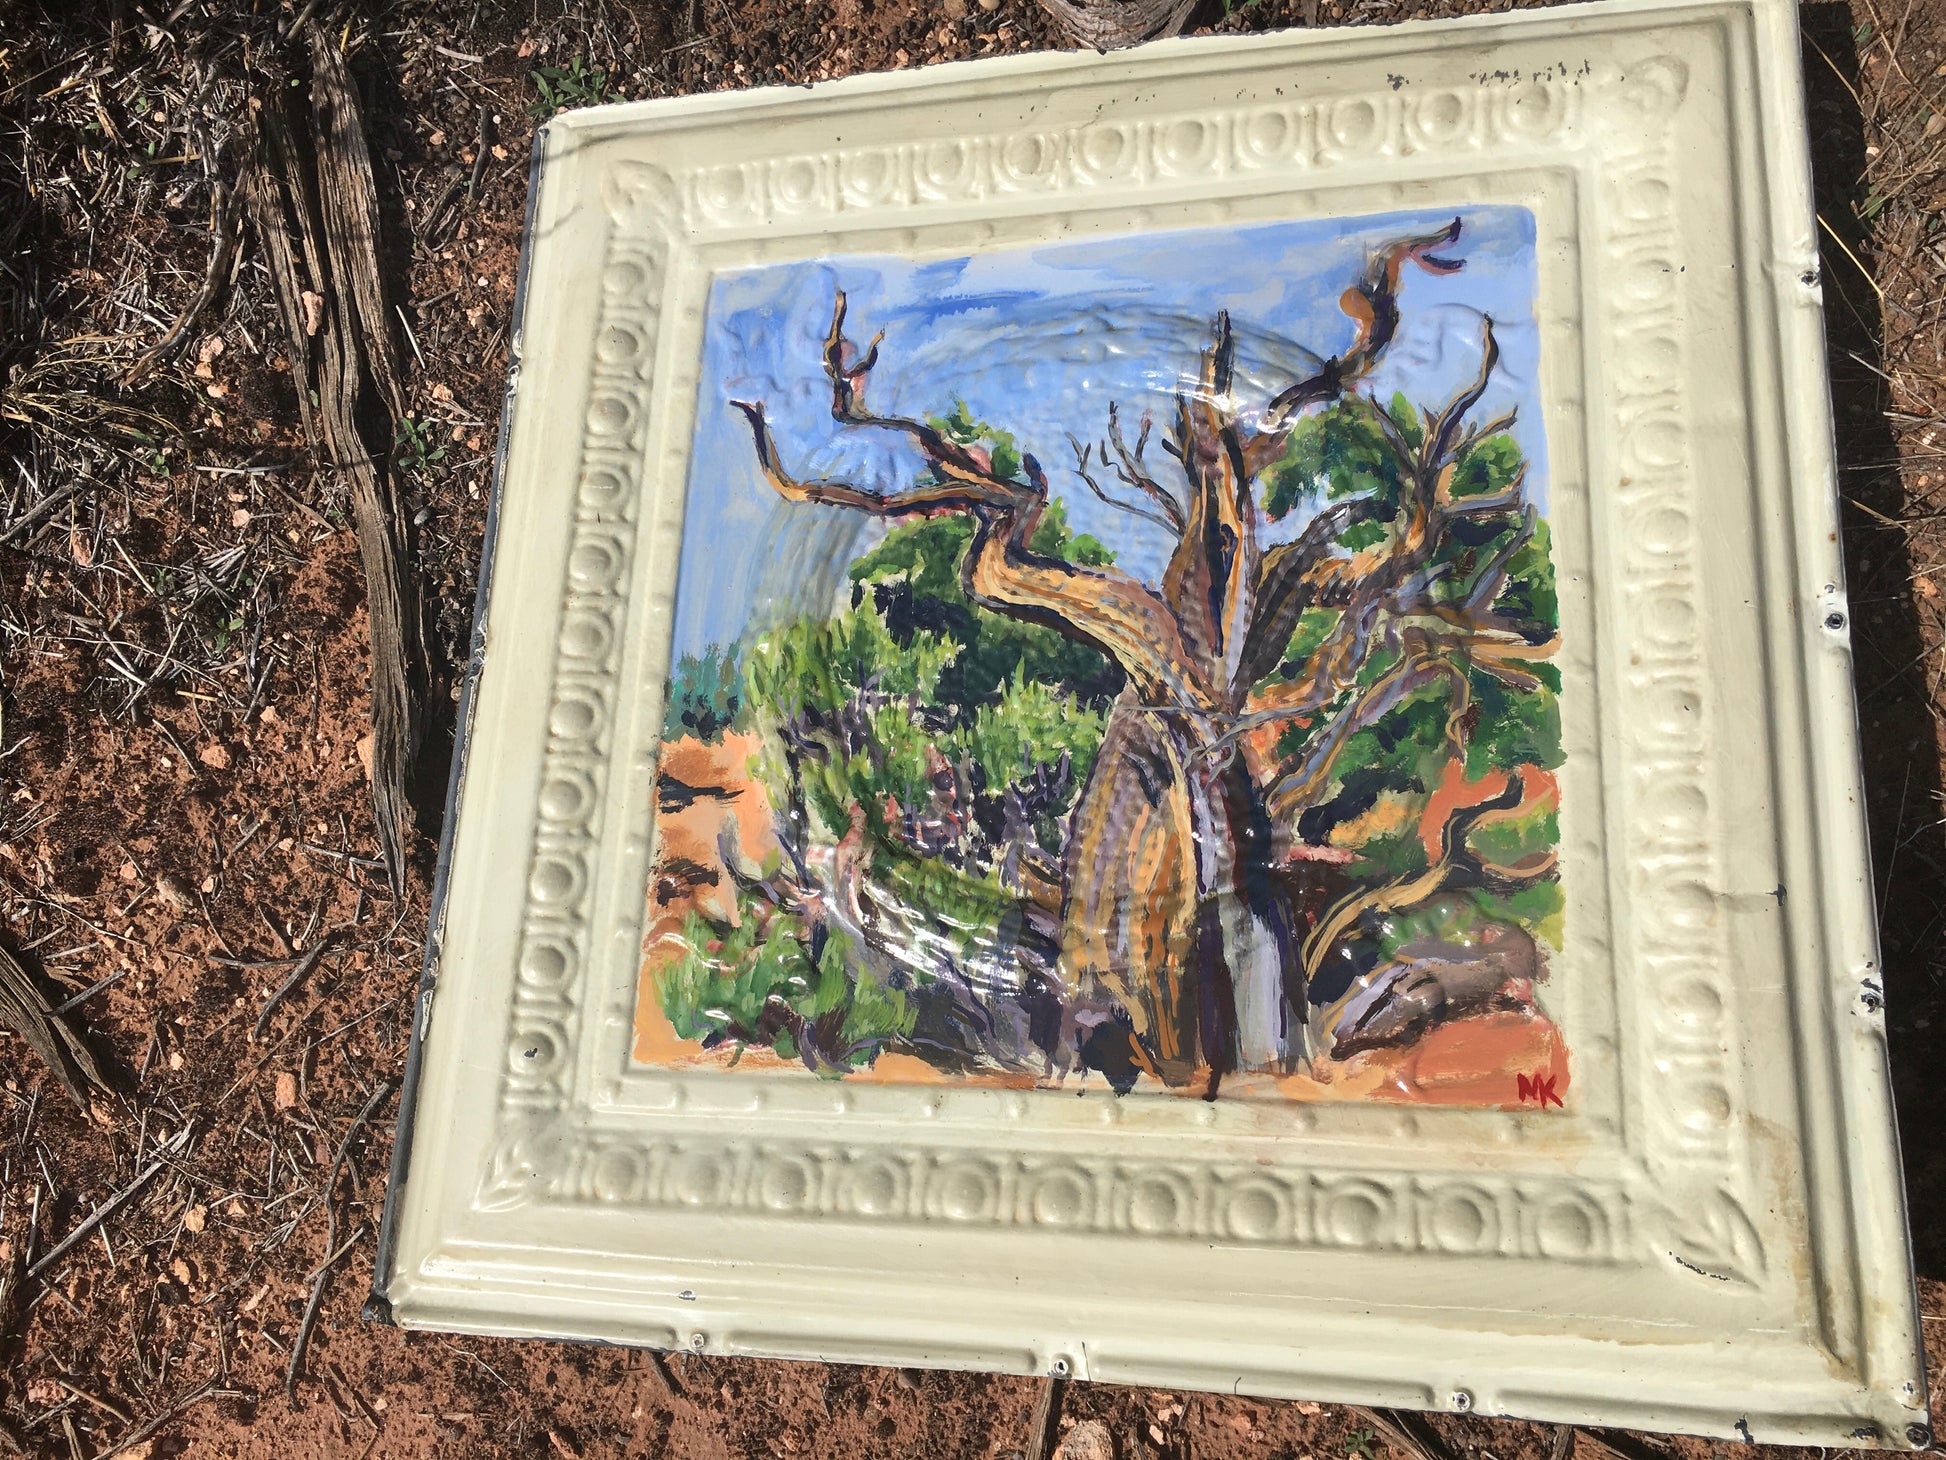 A close up view of the juniper tree and the detail of the antique metal ceiling tile